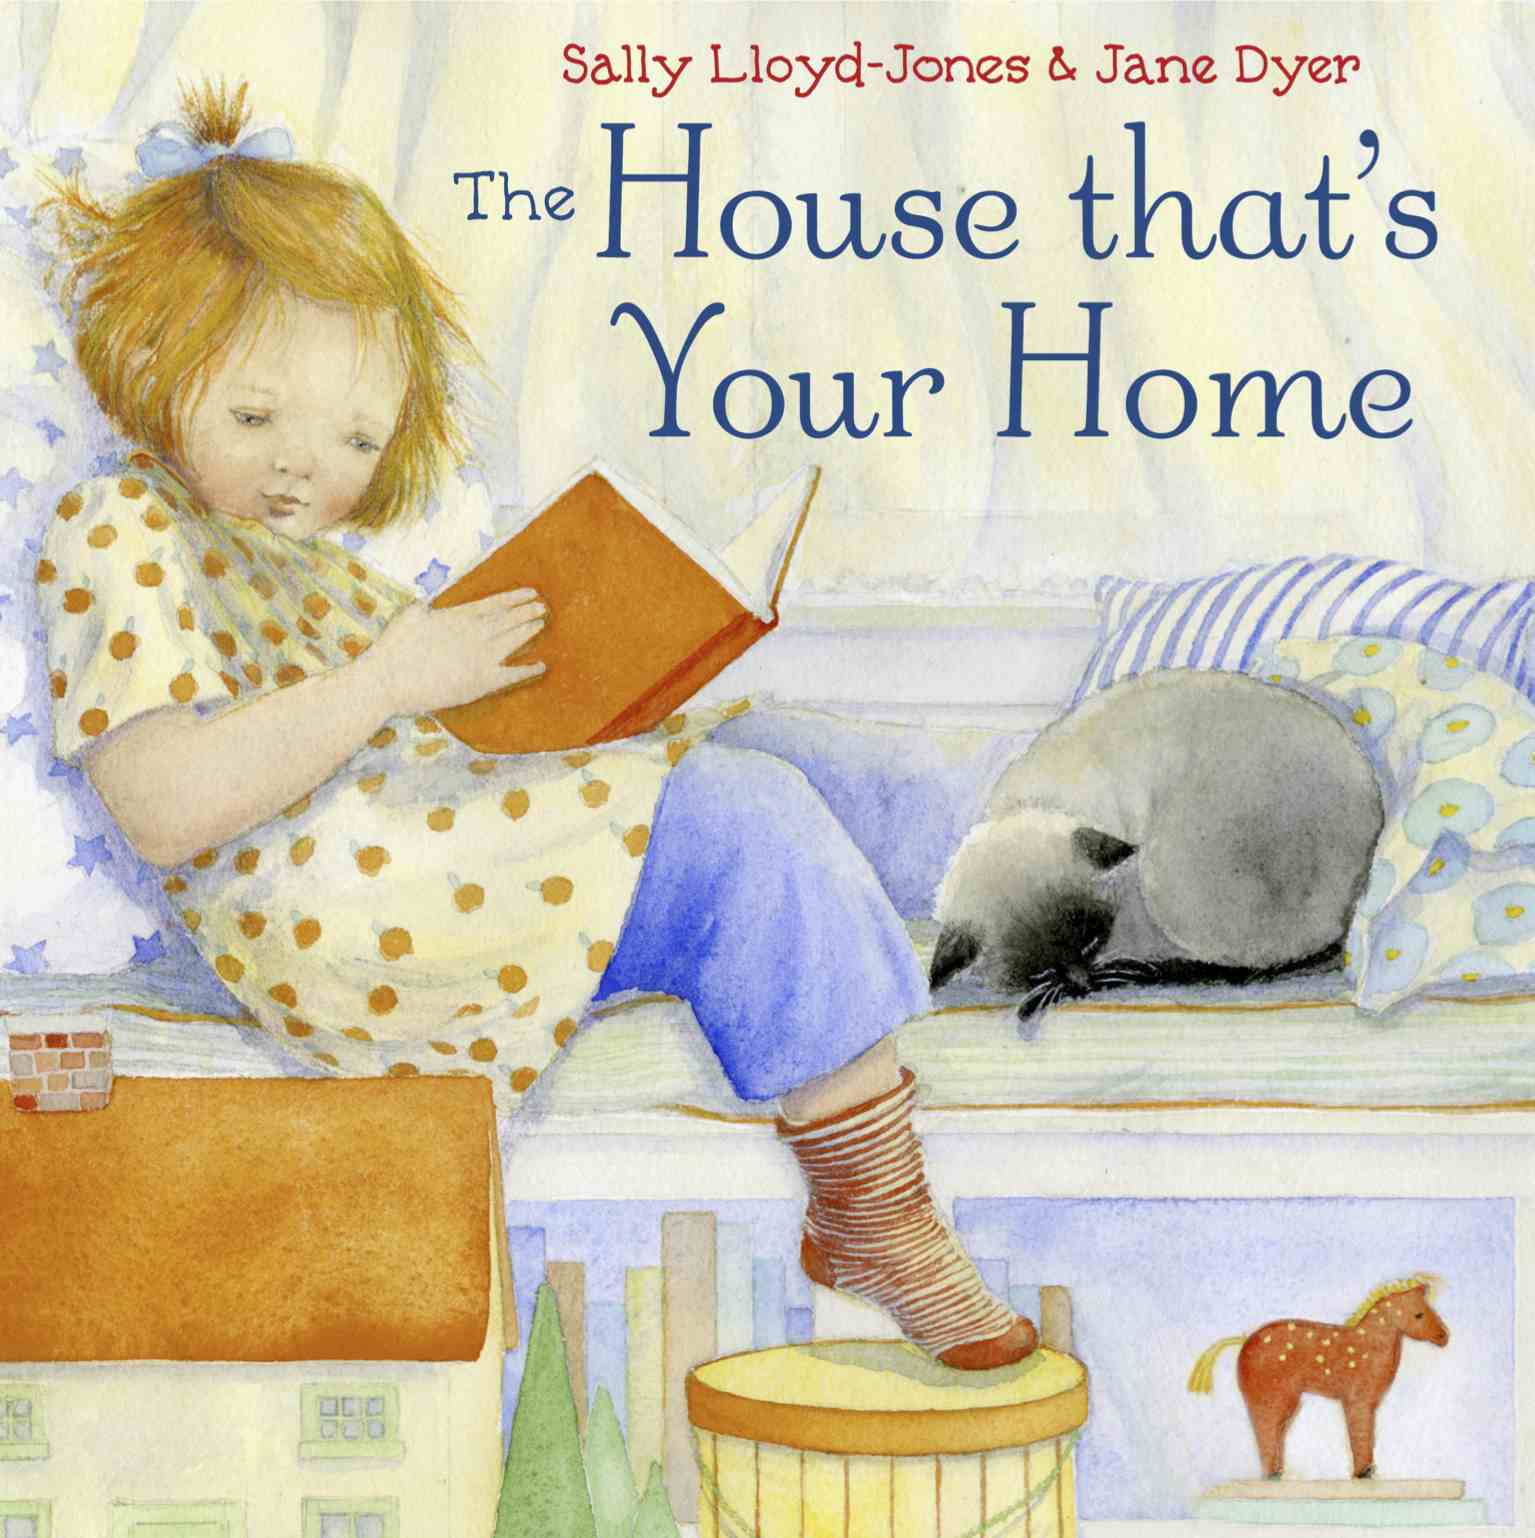 Sunday Story Time with Sally Lloyd-Jones (author of The House That's Your Home)